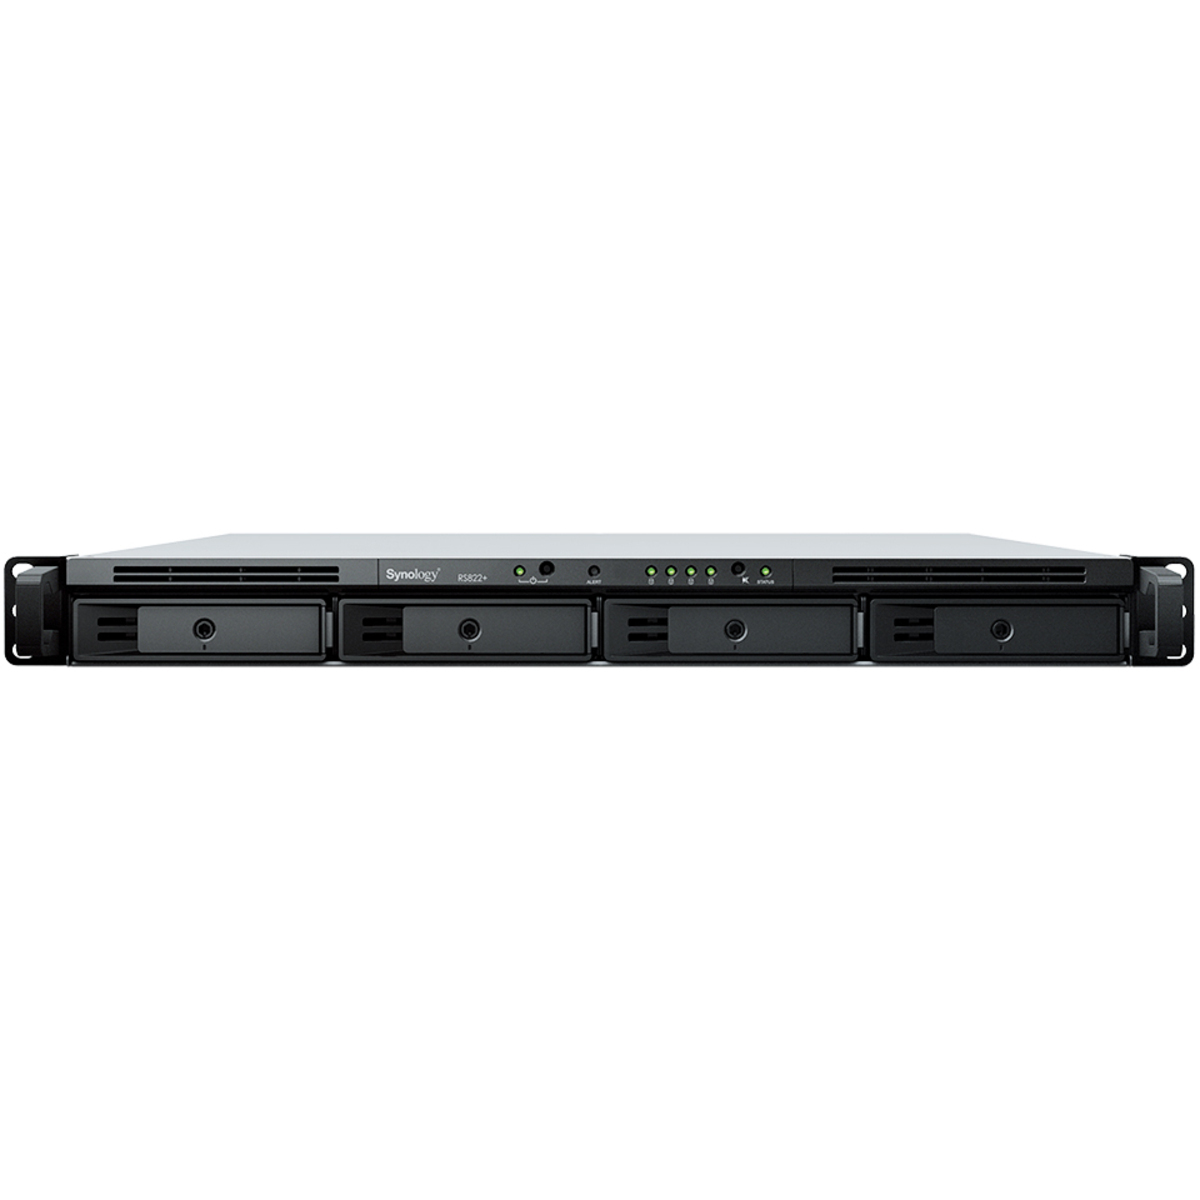 Synology RackStation RS822RP+ 72tb 4-Bay RackMount Multimedia / Power User / Business NAS - Network Attached Storage Device 4x18tb Seagate IronWolf Pro ST18000NT001 3.5 7200rpm SATA 6Gb/s HDD NAS Class Drives Installed - Burn-In Tested - FREE RAM UPGRADE RackStation RS822RP+